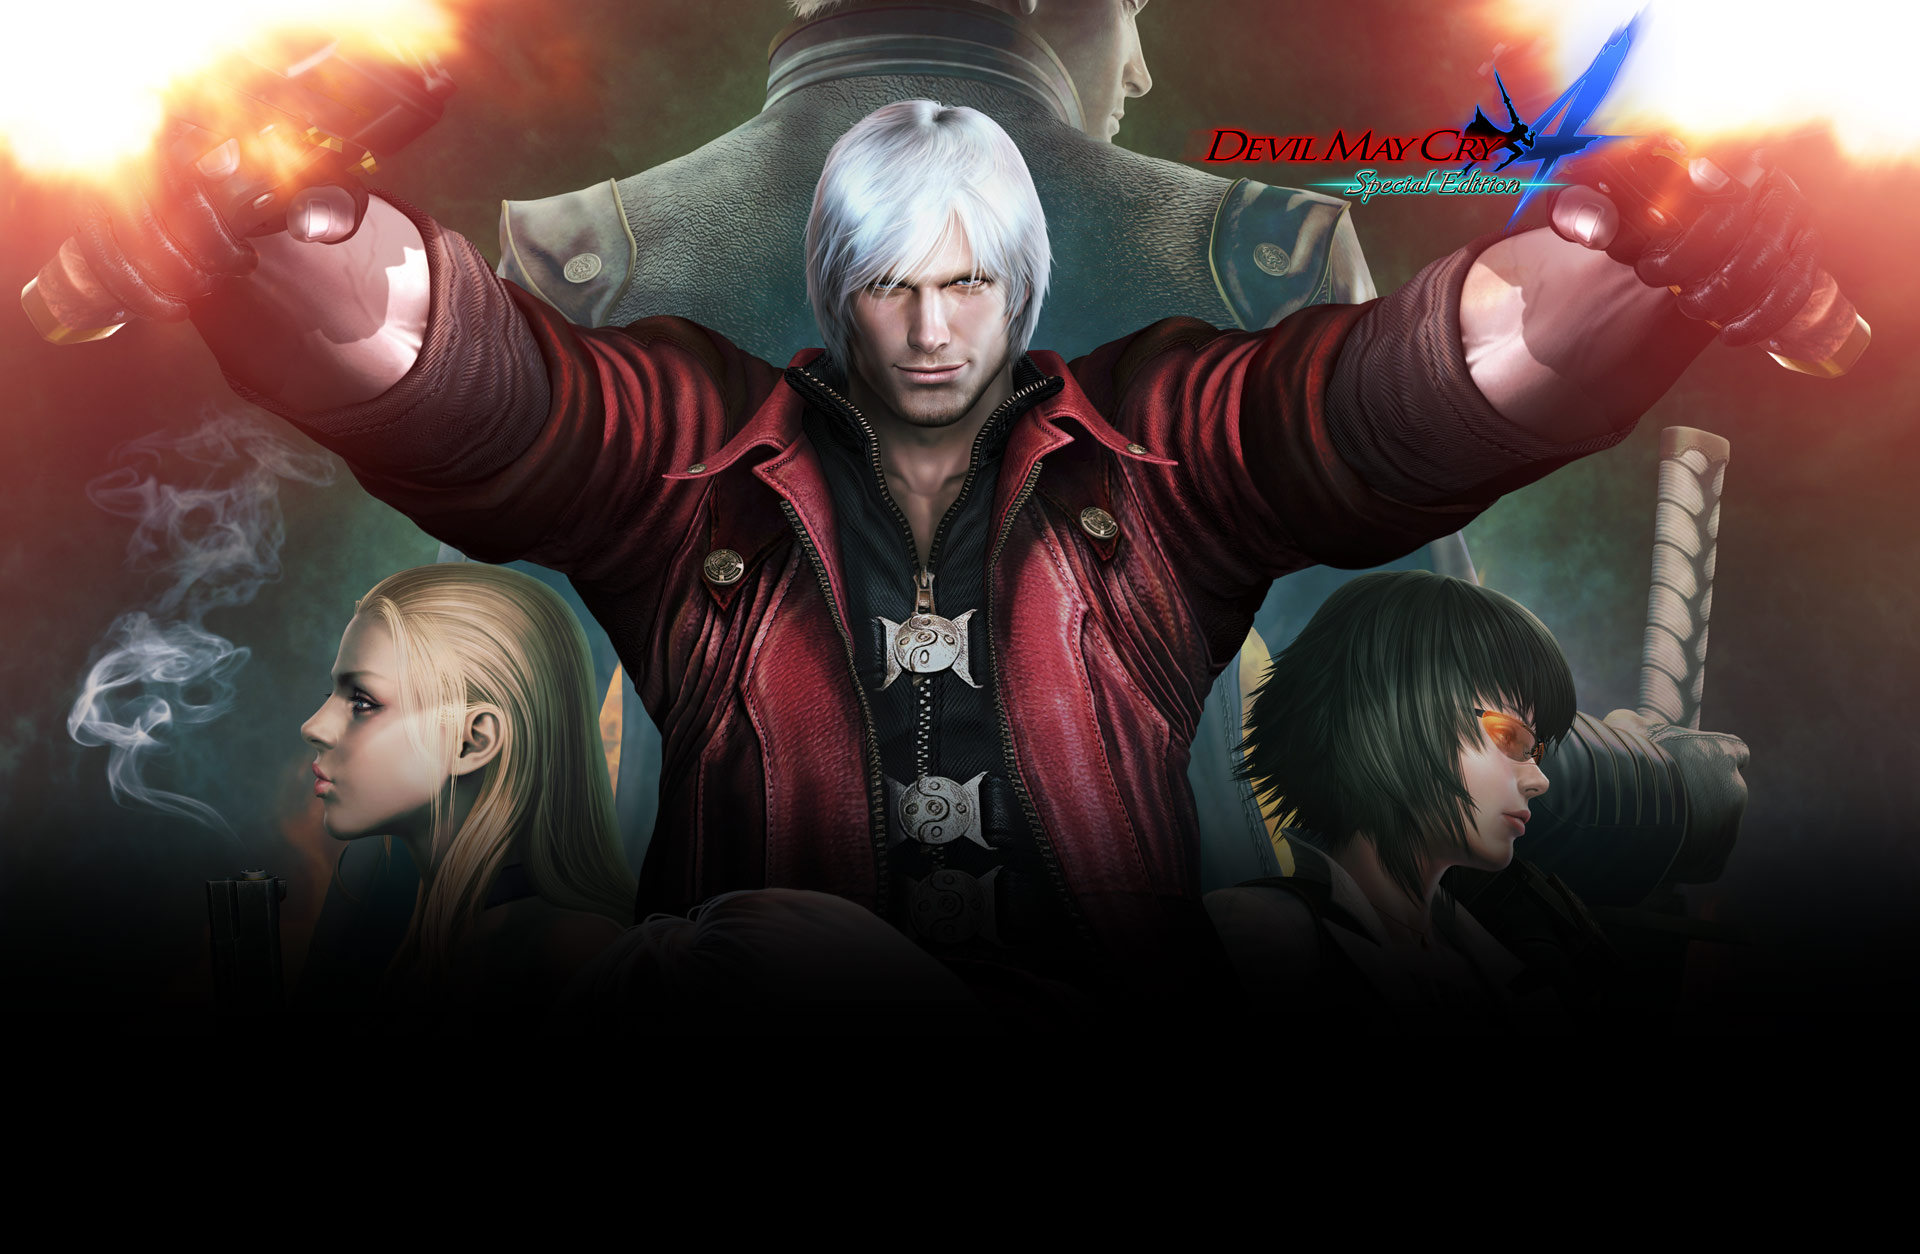 Devil may cry 4 special edition nude mod